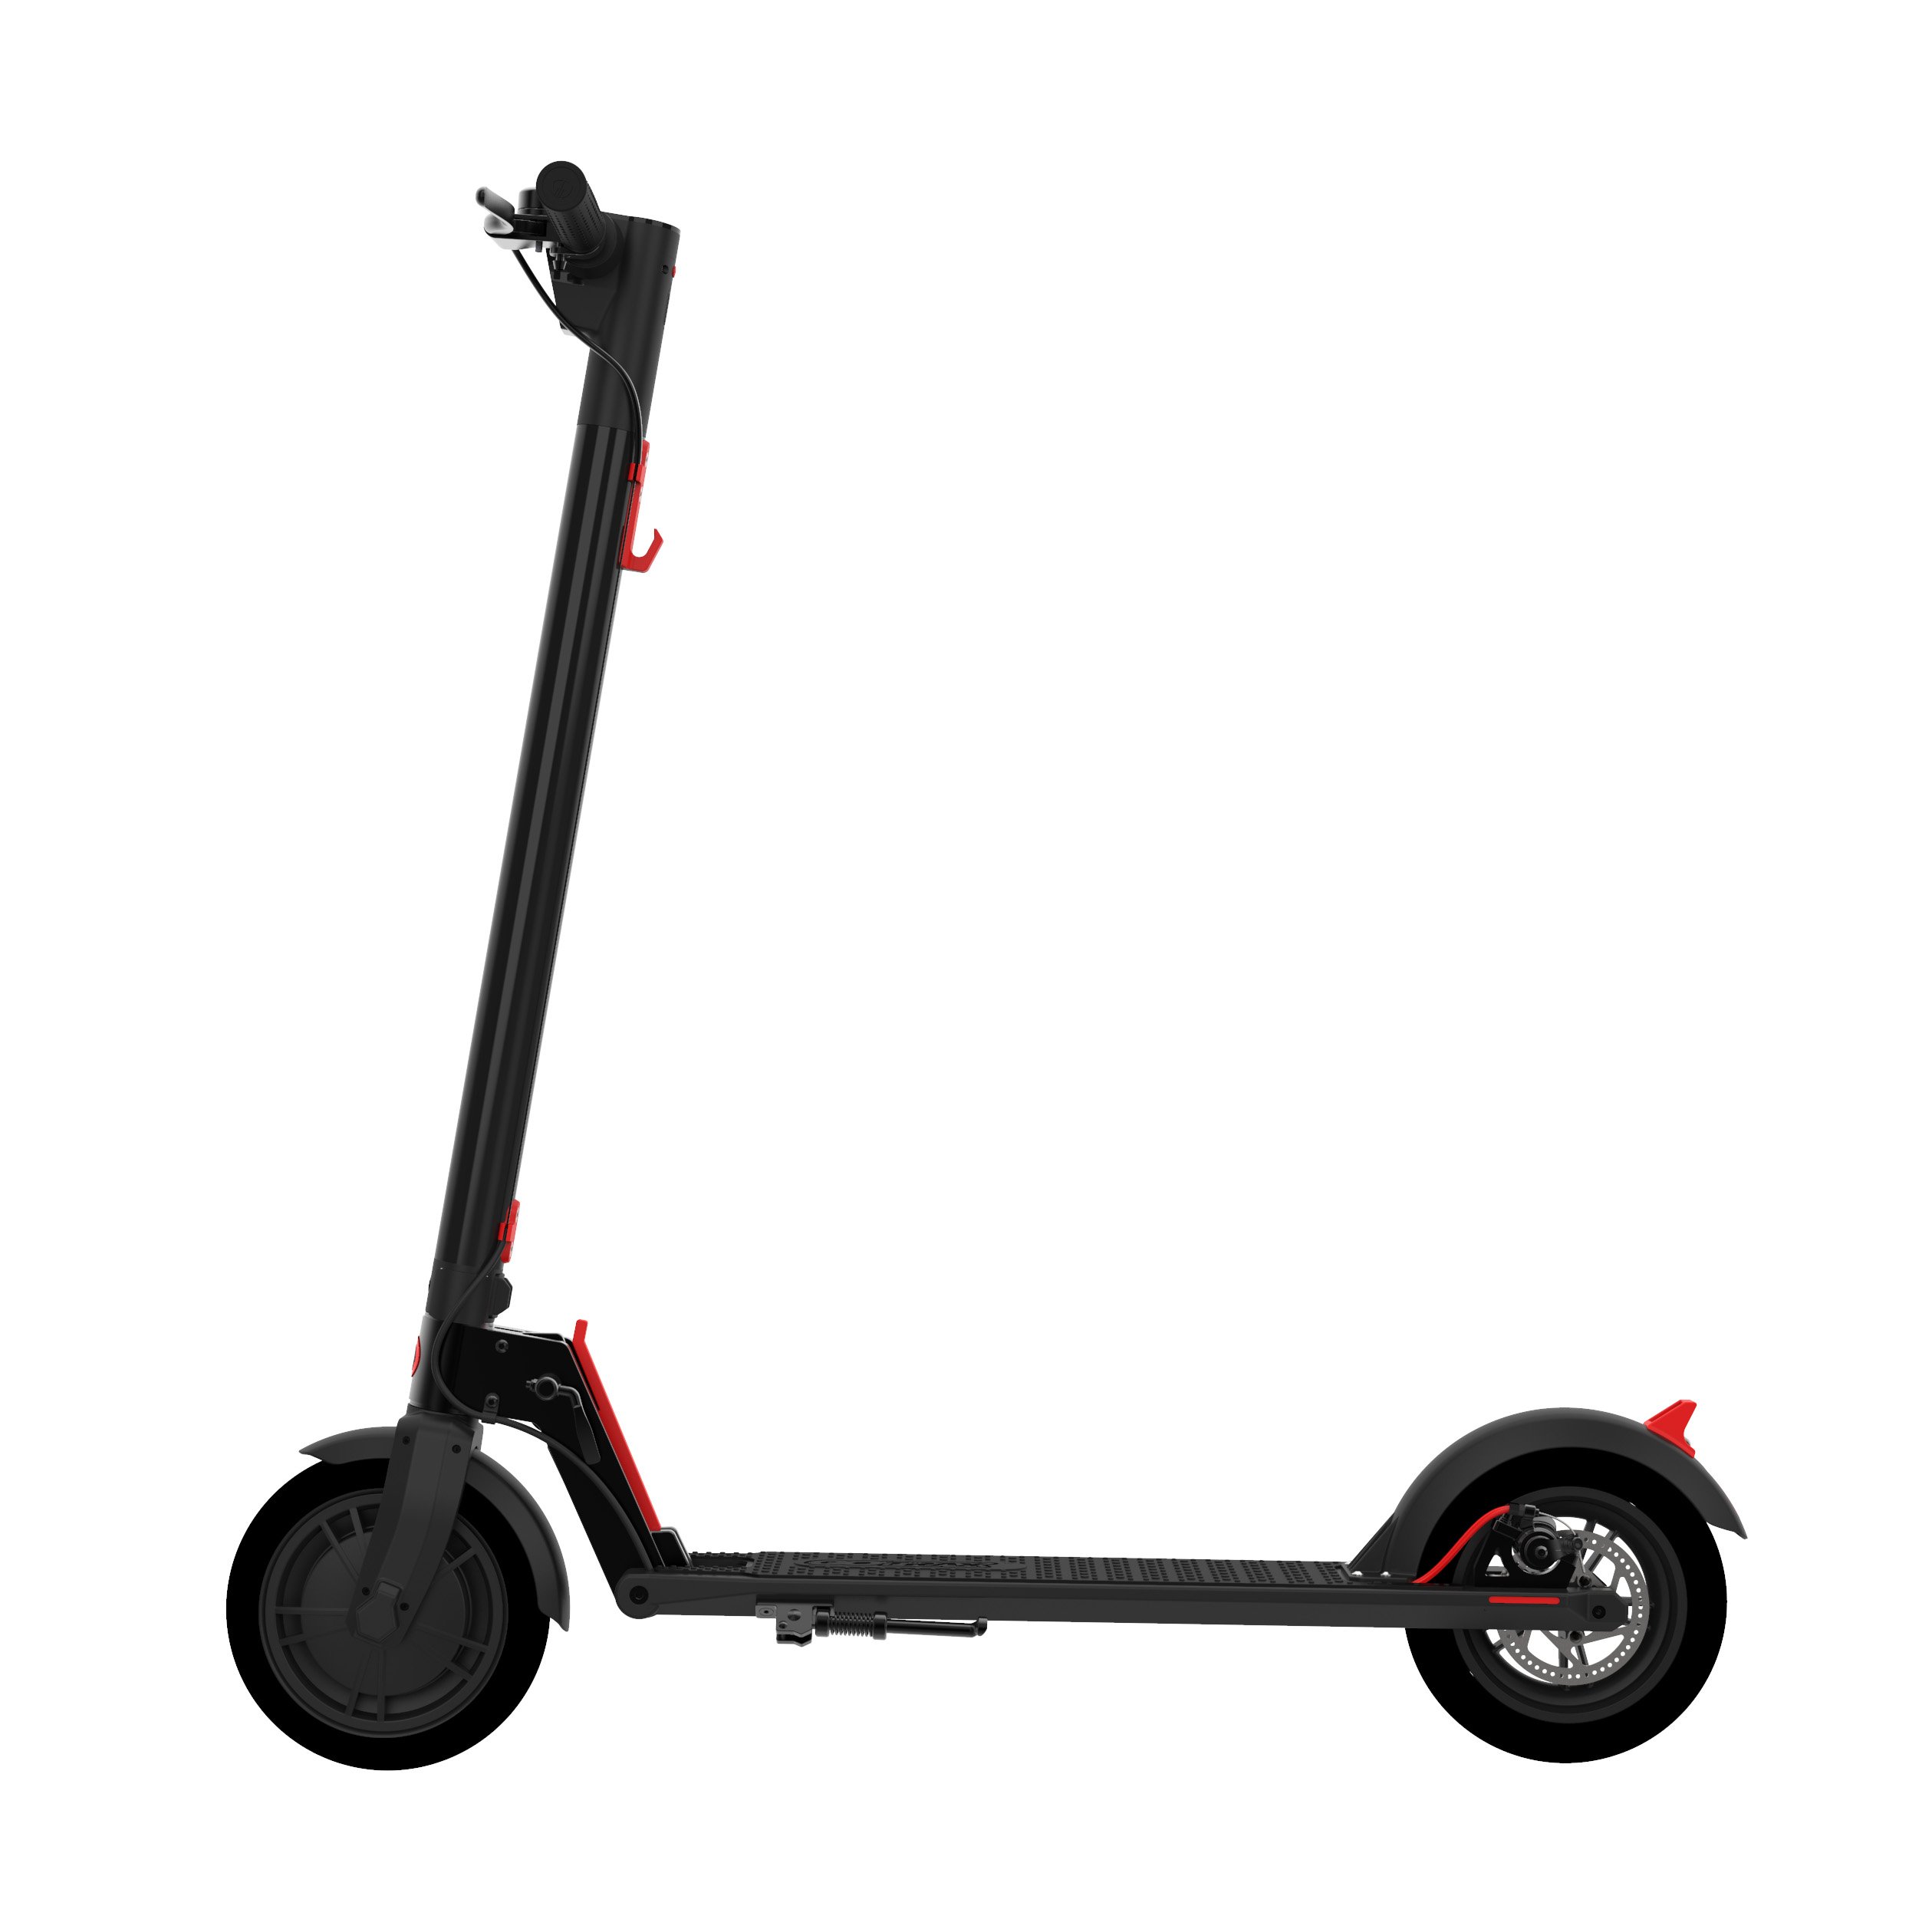 Refurbished Gotrax GXL V2 electric scooter for $171 with 5% discount code (no tax for most states) + FS